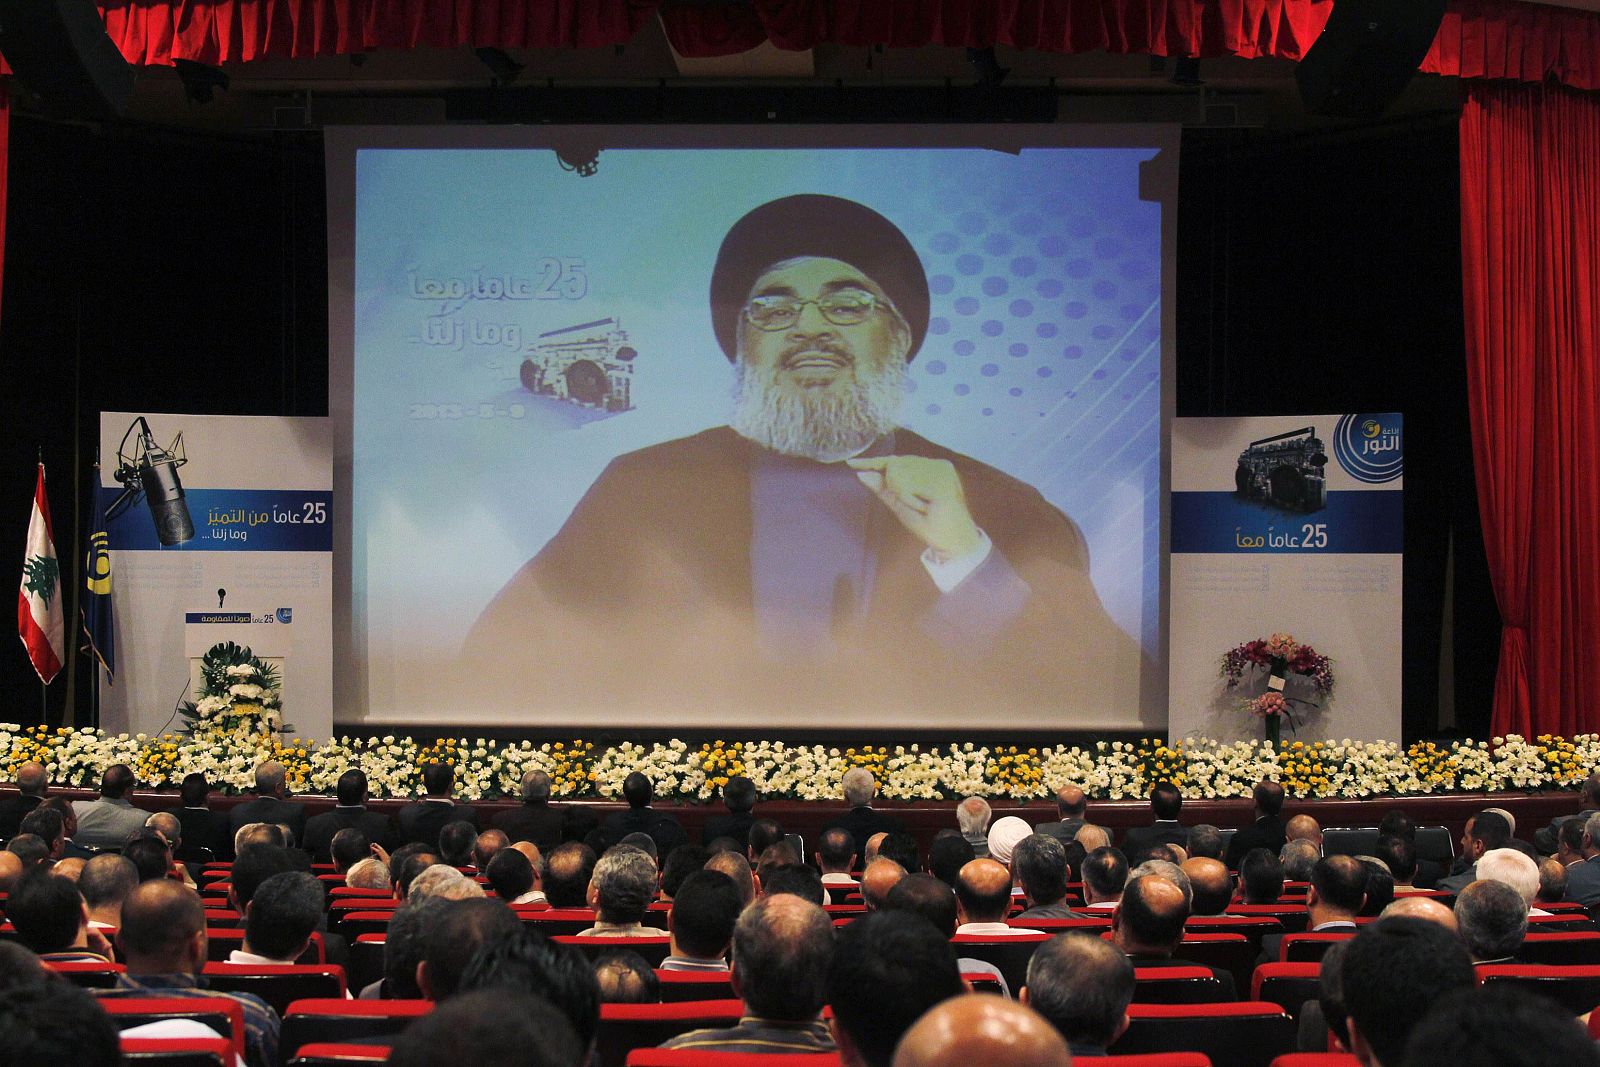 Lebanon's Hezbollah leader Nasrallah is projected on a screen during a live broadcast at an event marking the 25th anniversary of the establishment of Al-Nour radio station in Beirut